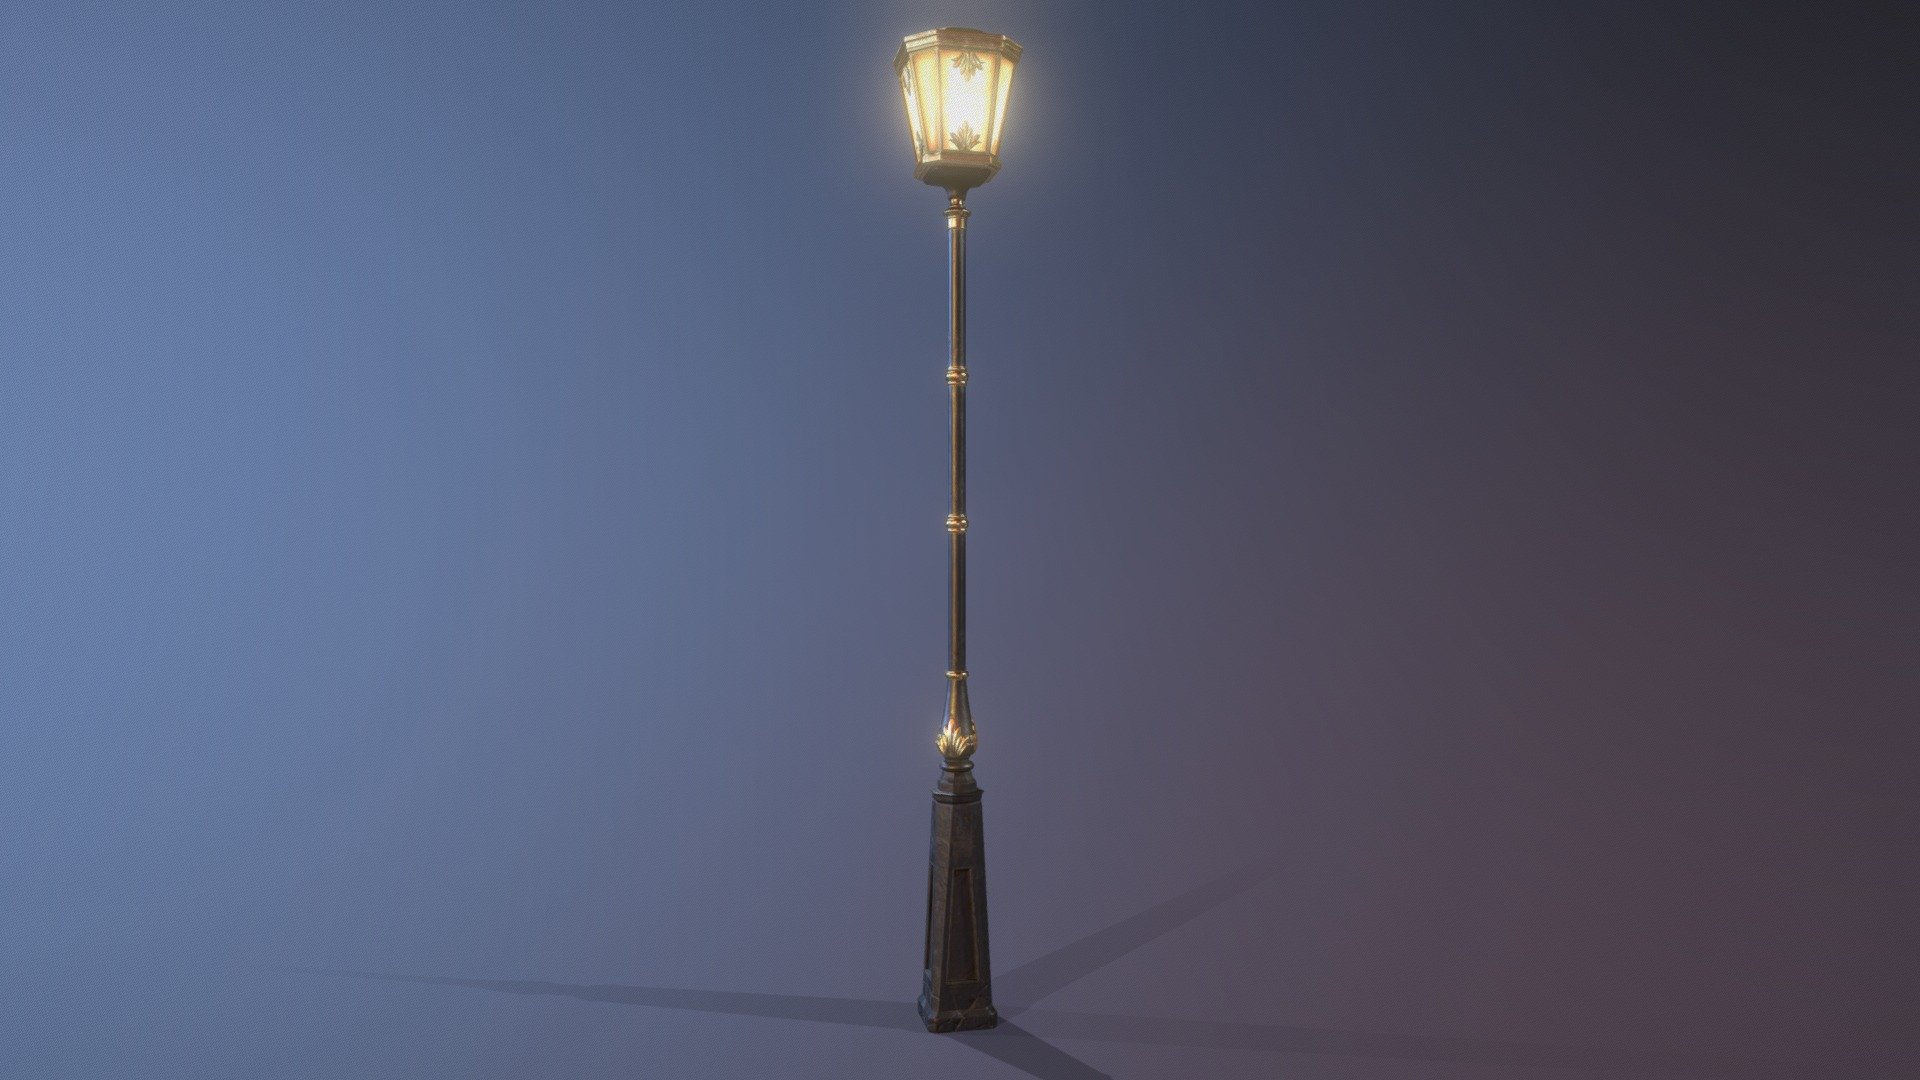 Little victorian street lamp, originally made for the virtual world application Second Life.

Modelled in Autodesk 3ds Max 2019, with high poly details added in ZBrush.
PBR-textures created in Substance Painter 3d model